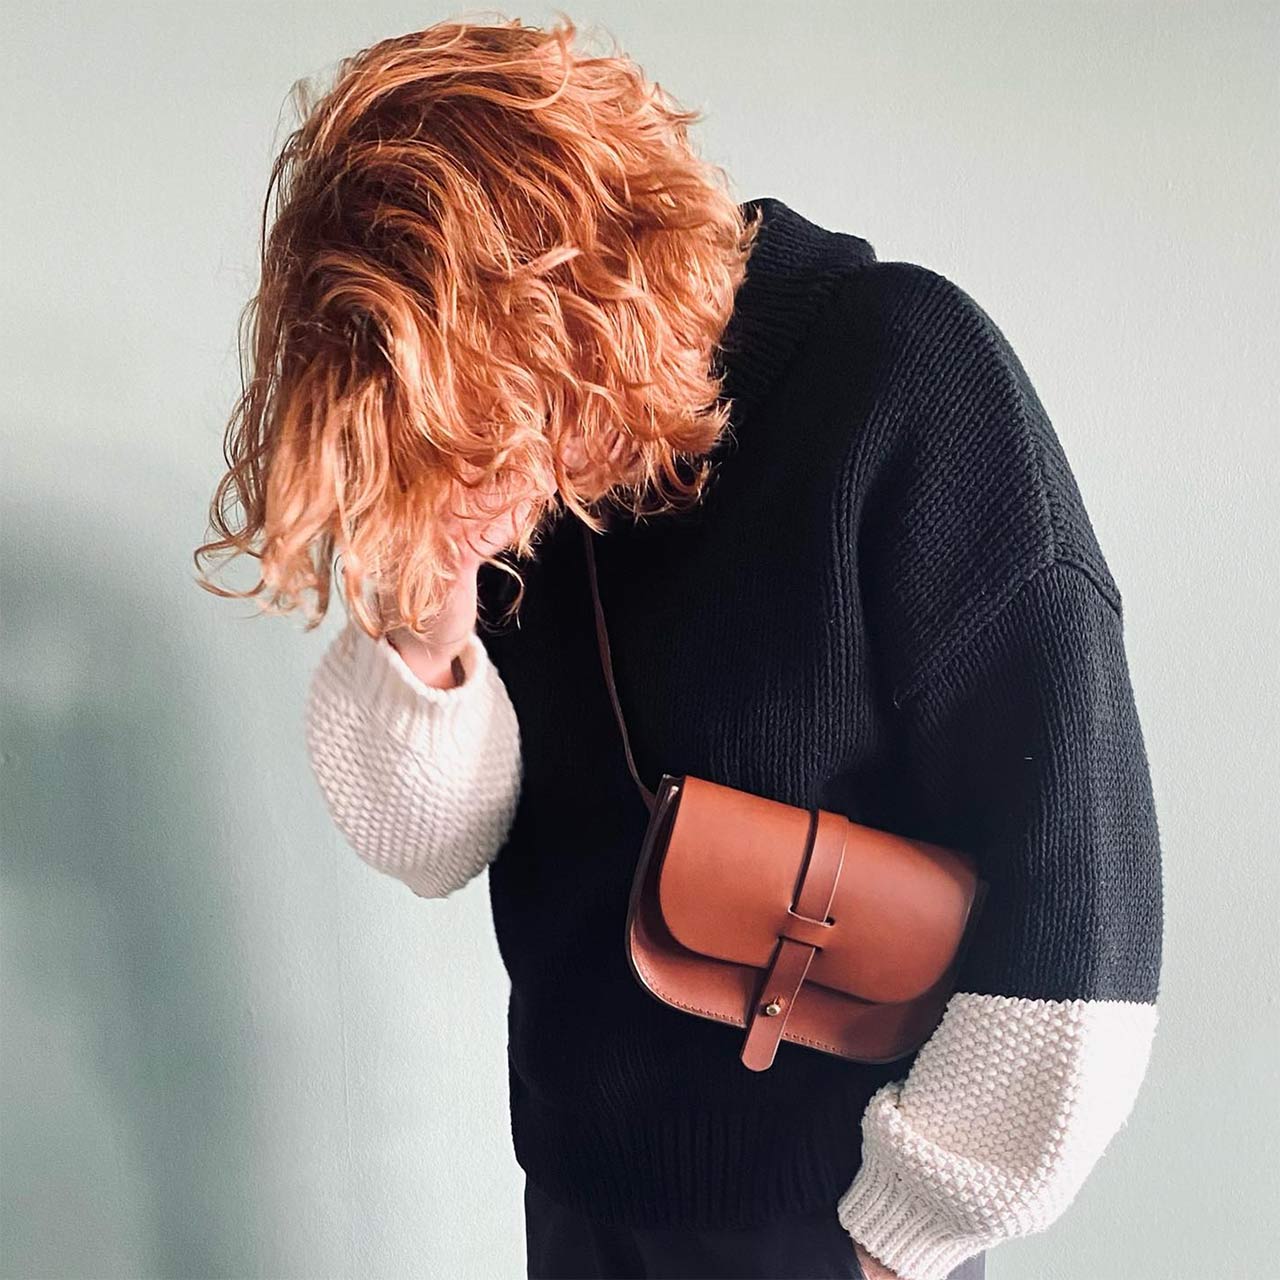 red haired woman with a black sweater wearing a brown leather belt bag from p kirkwood leather works